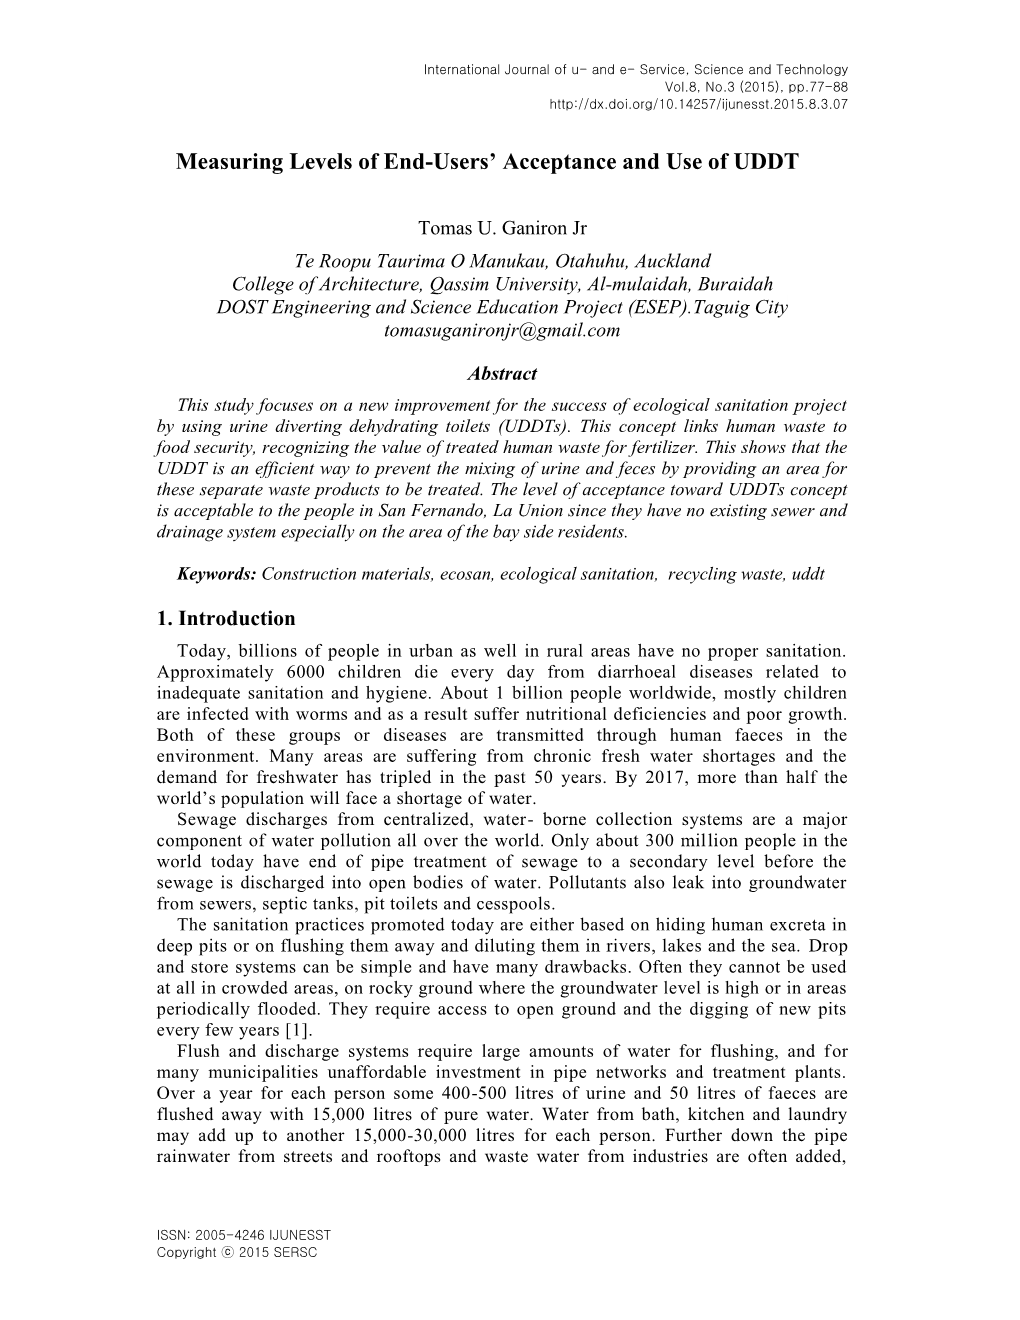 Measuring Levels of End-Users' Acceptance and Use of UDDT